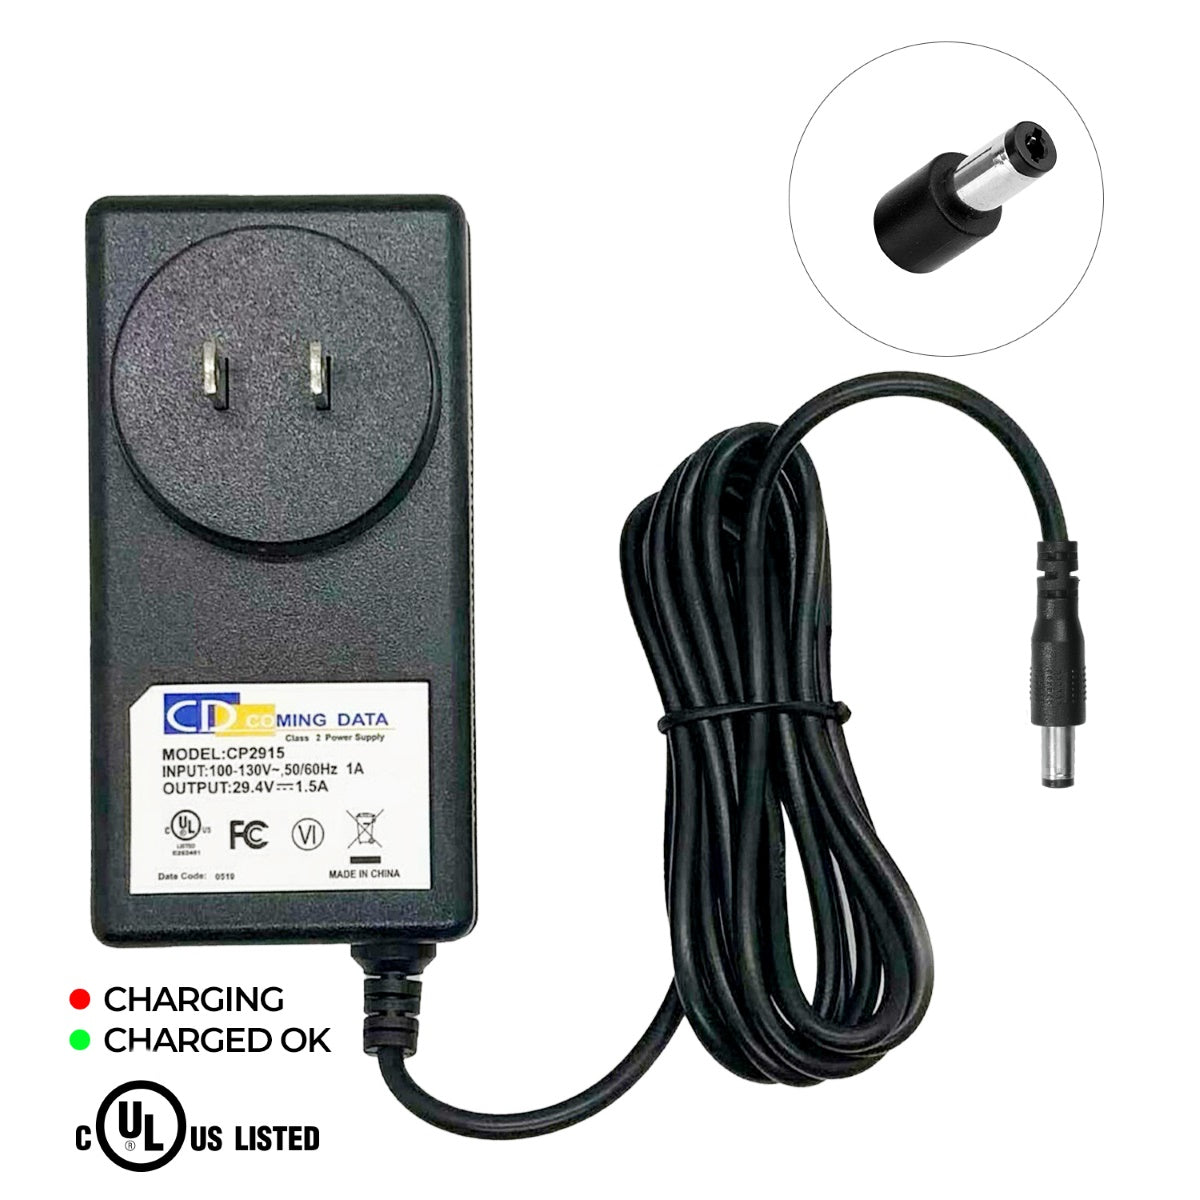 Charger for Shoprider Sunrunner S 777-3/4 Scooter